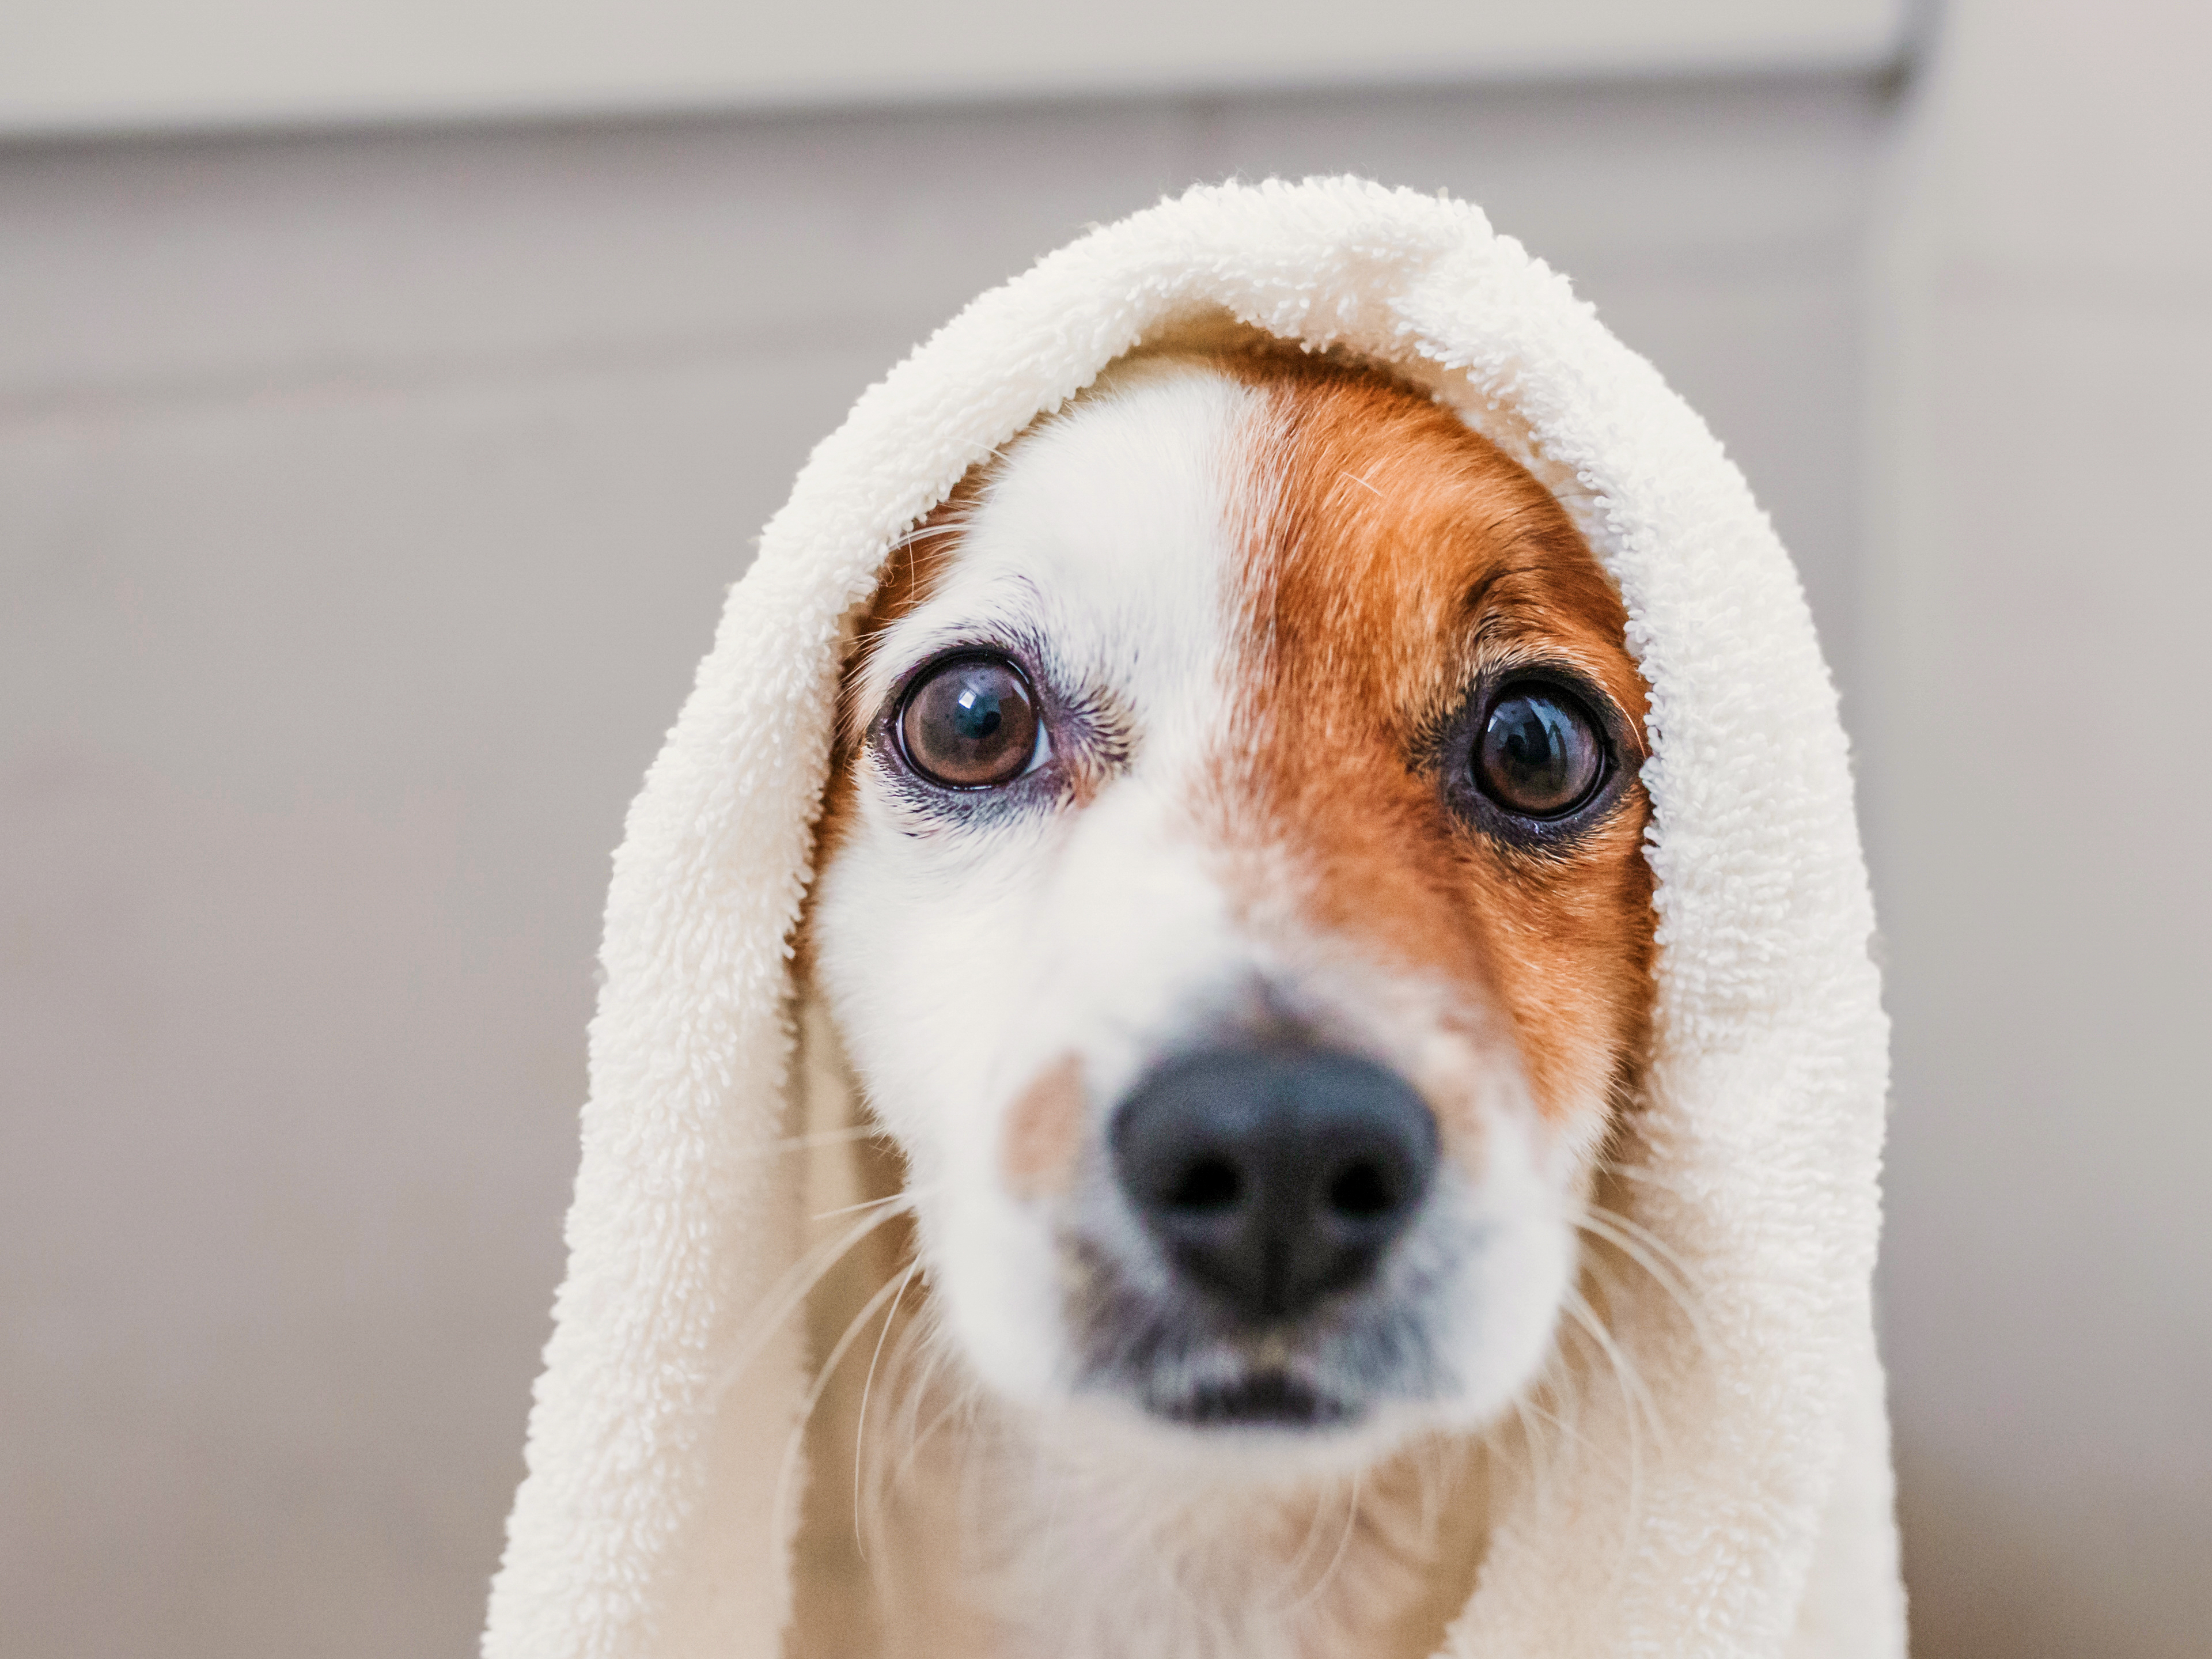 Jack Russell Terrier puppy with a white towel on its head